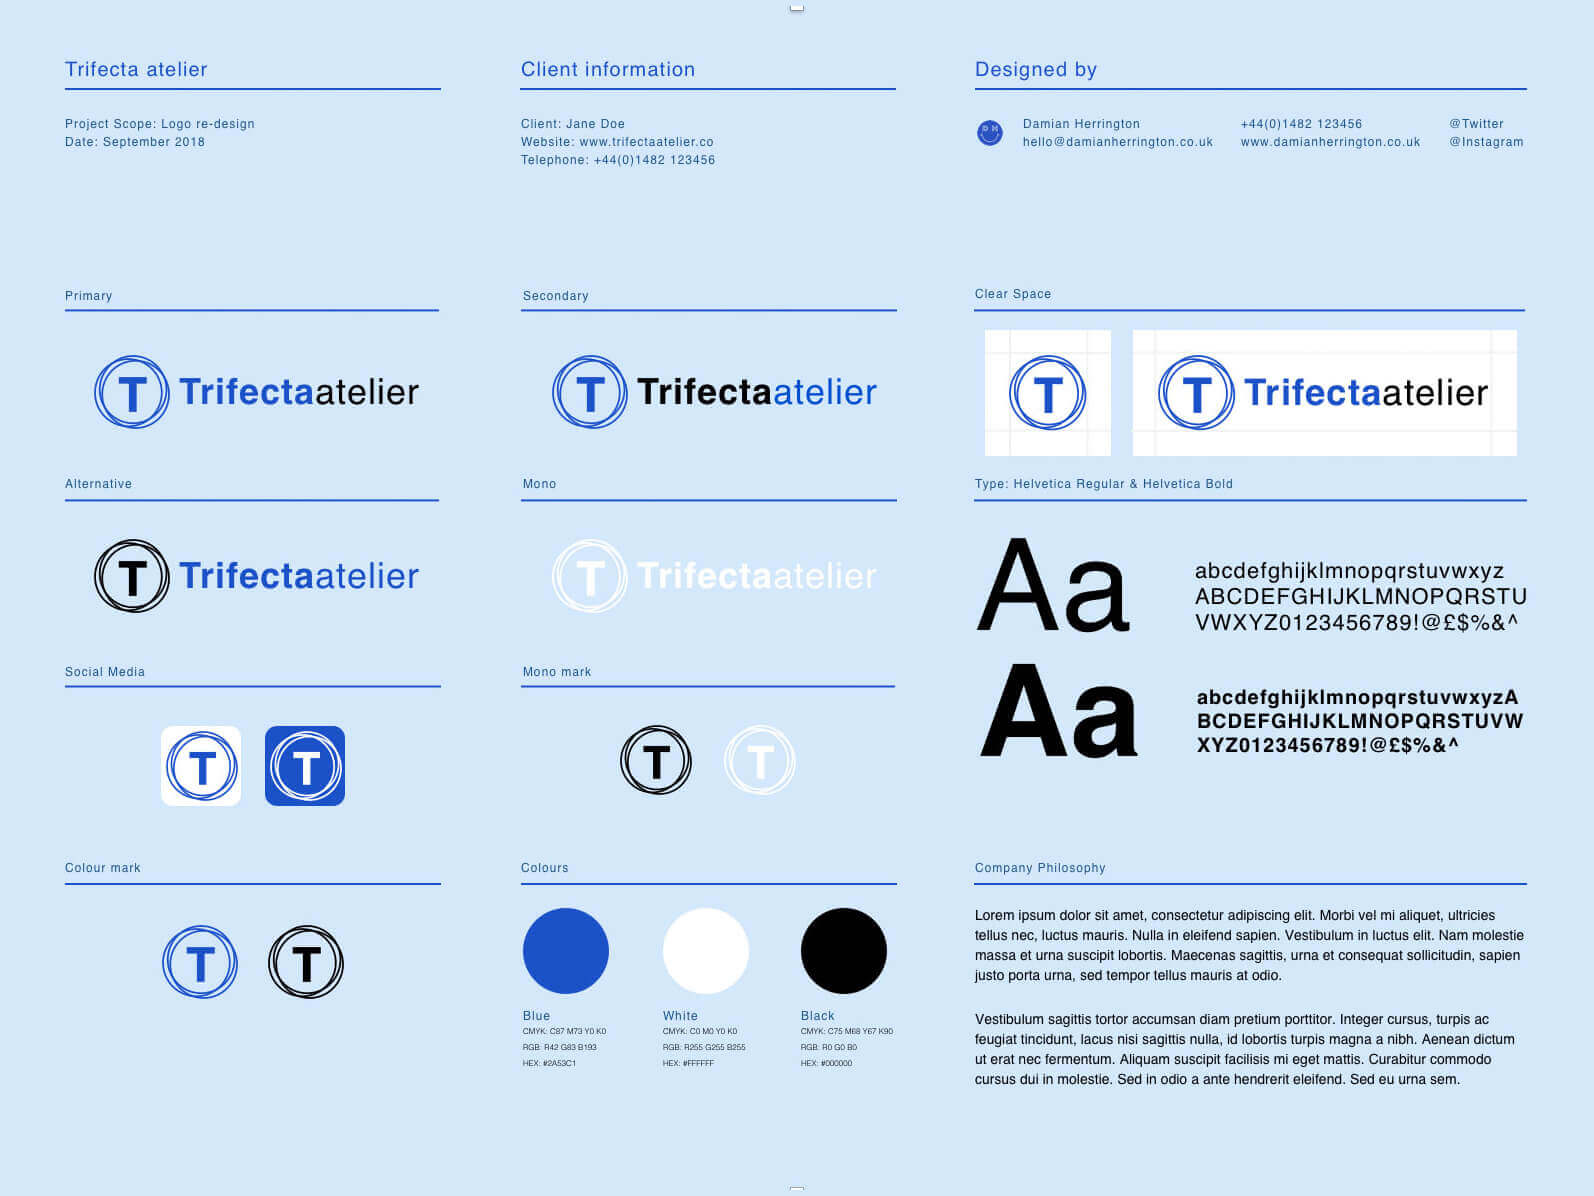 A4 Page Brand Guideline Template [Sketch]